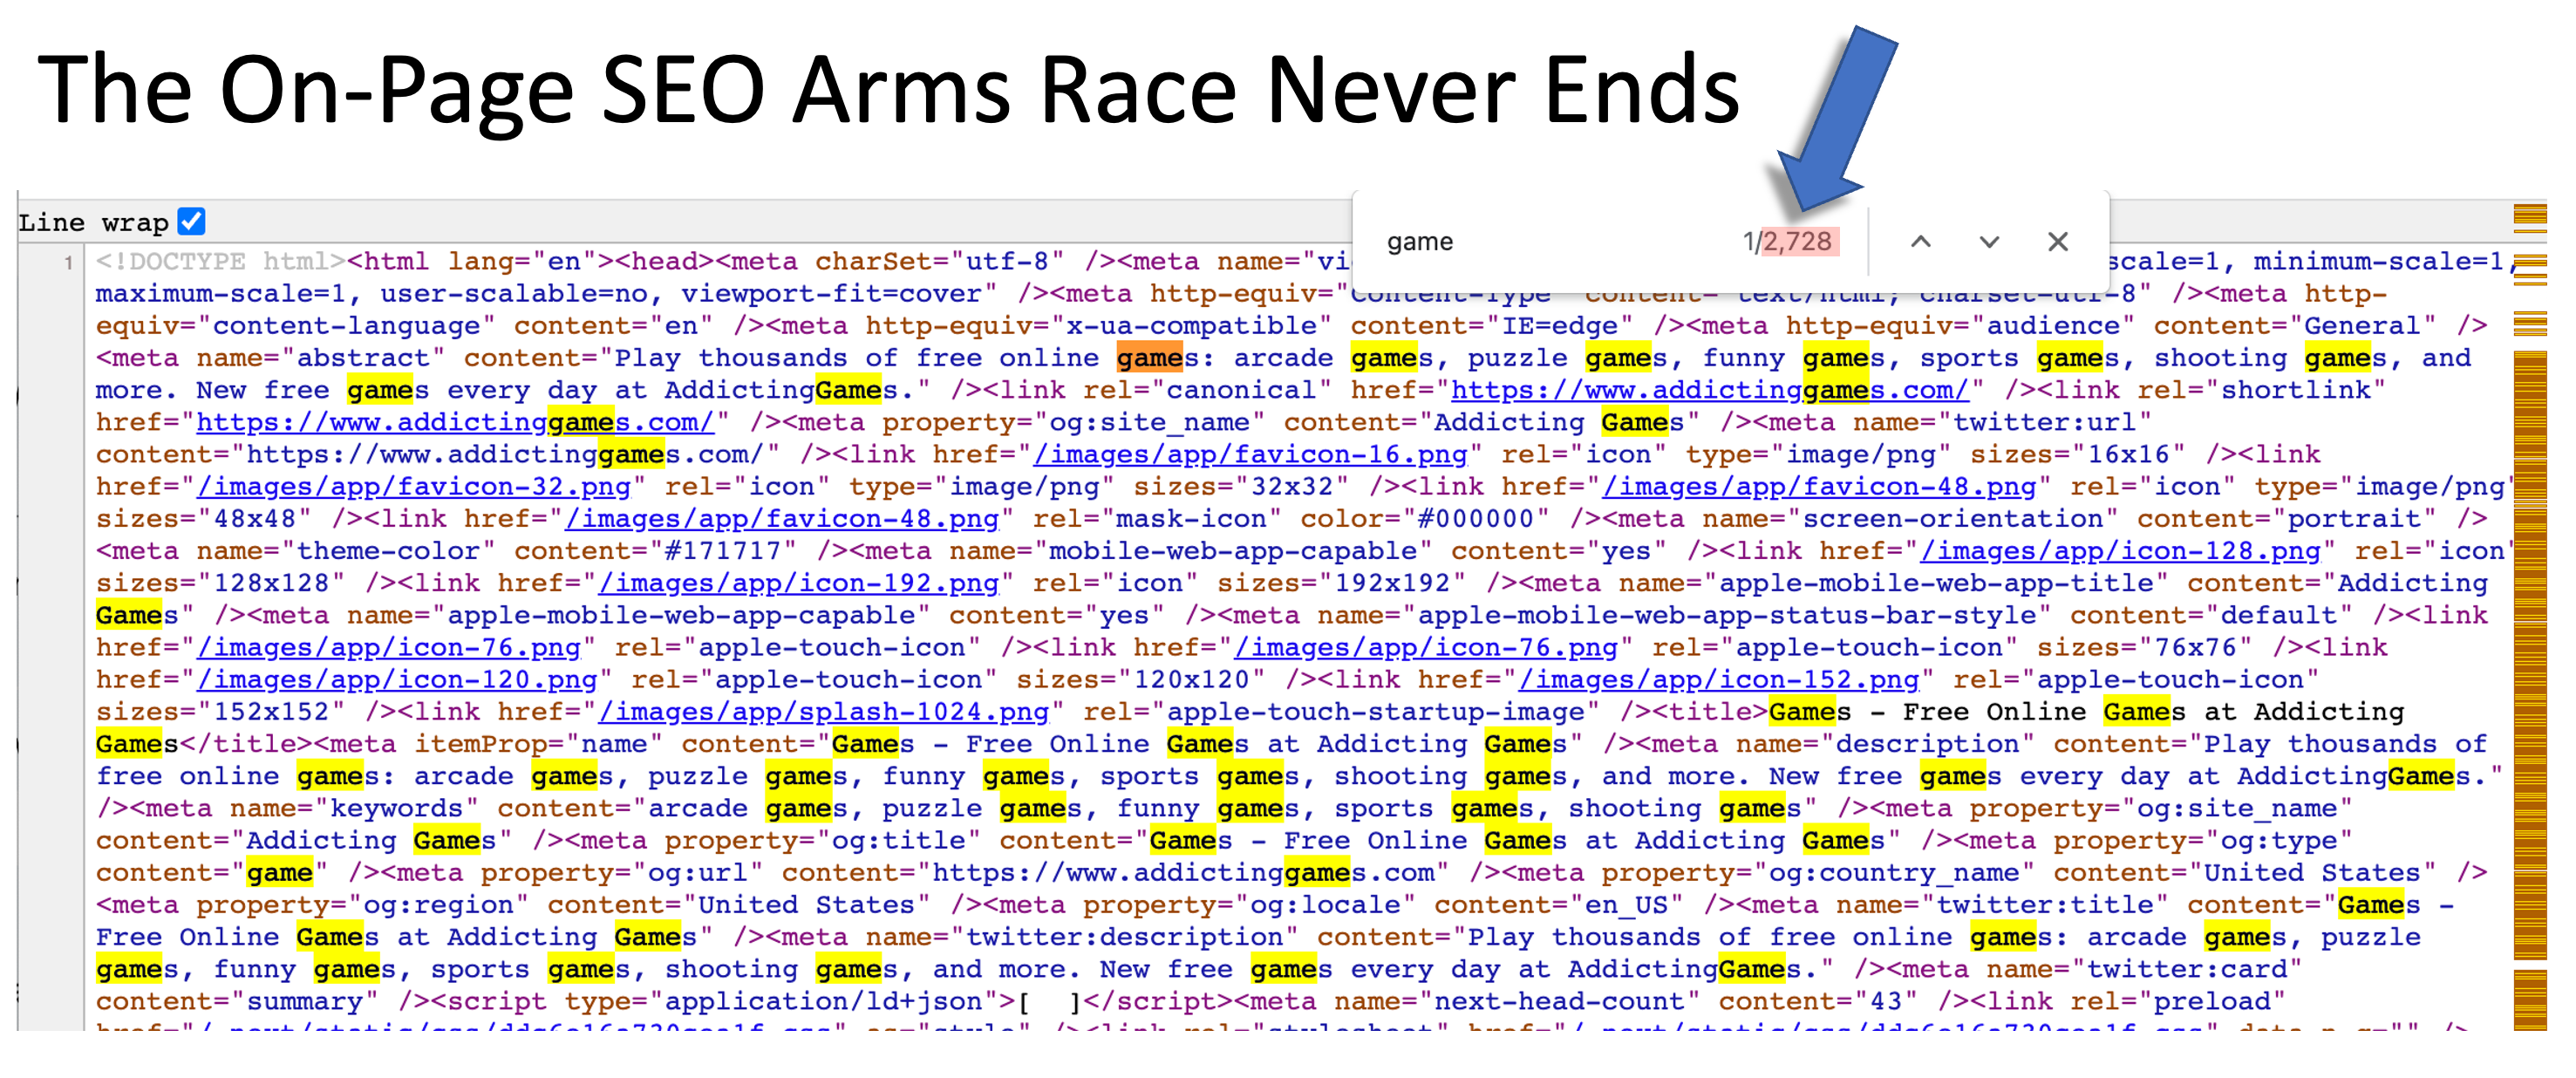 Stealth SEO Arms Race Never Ends